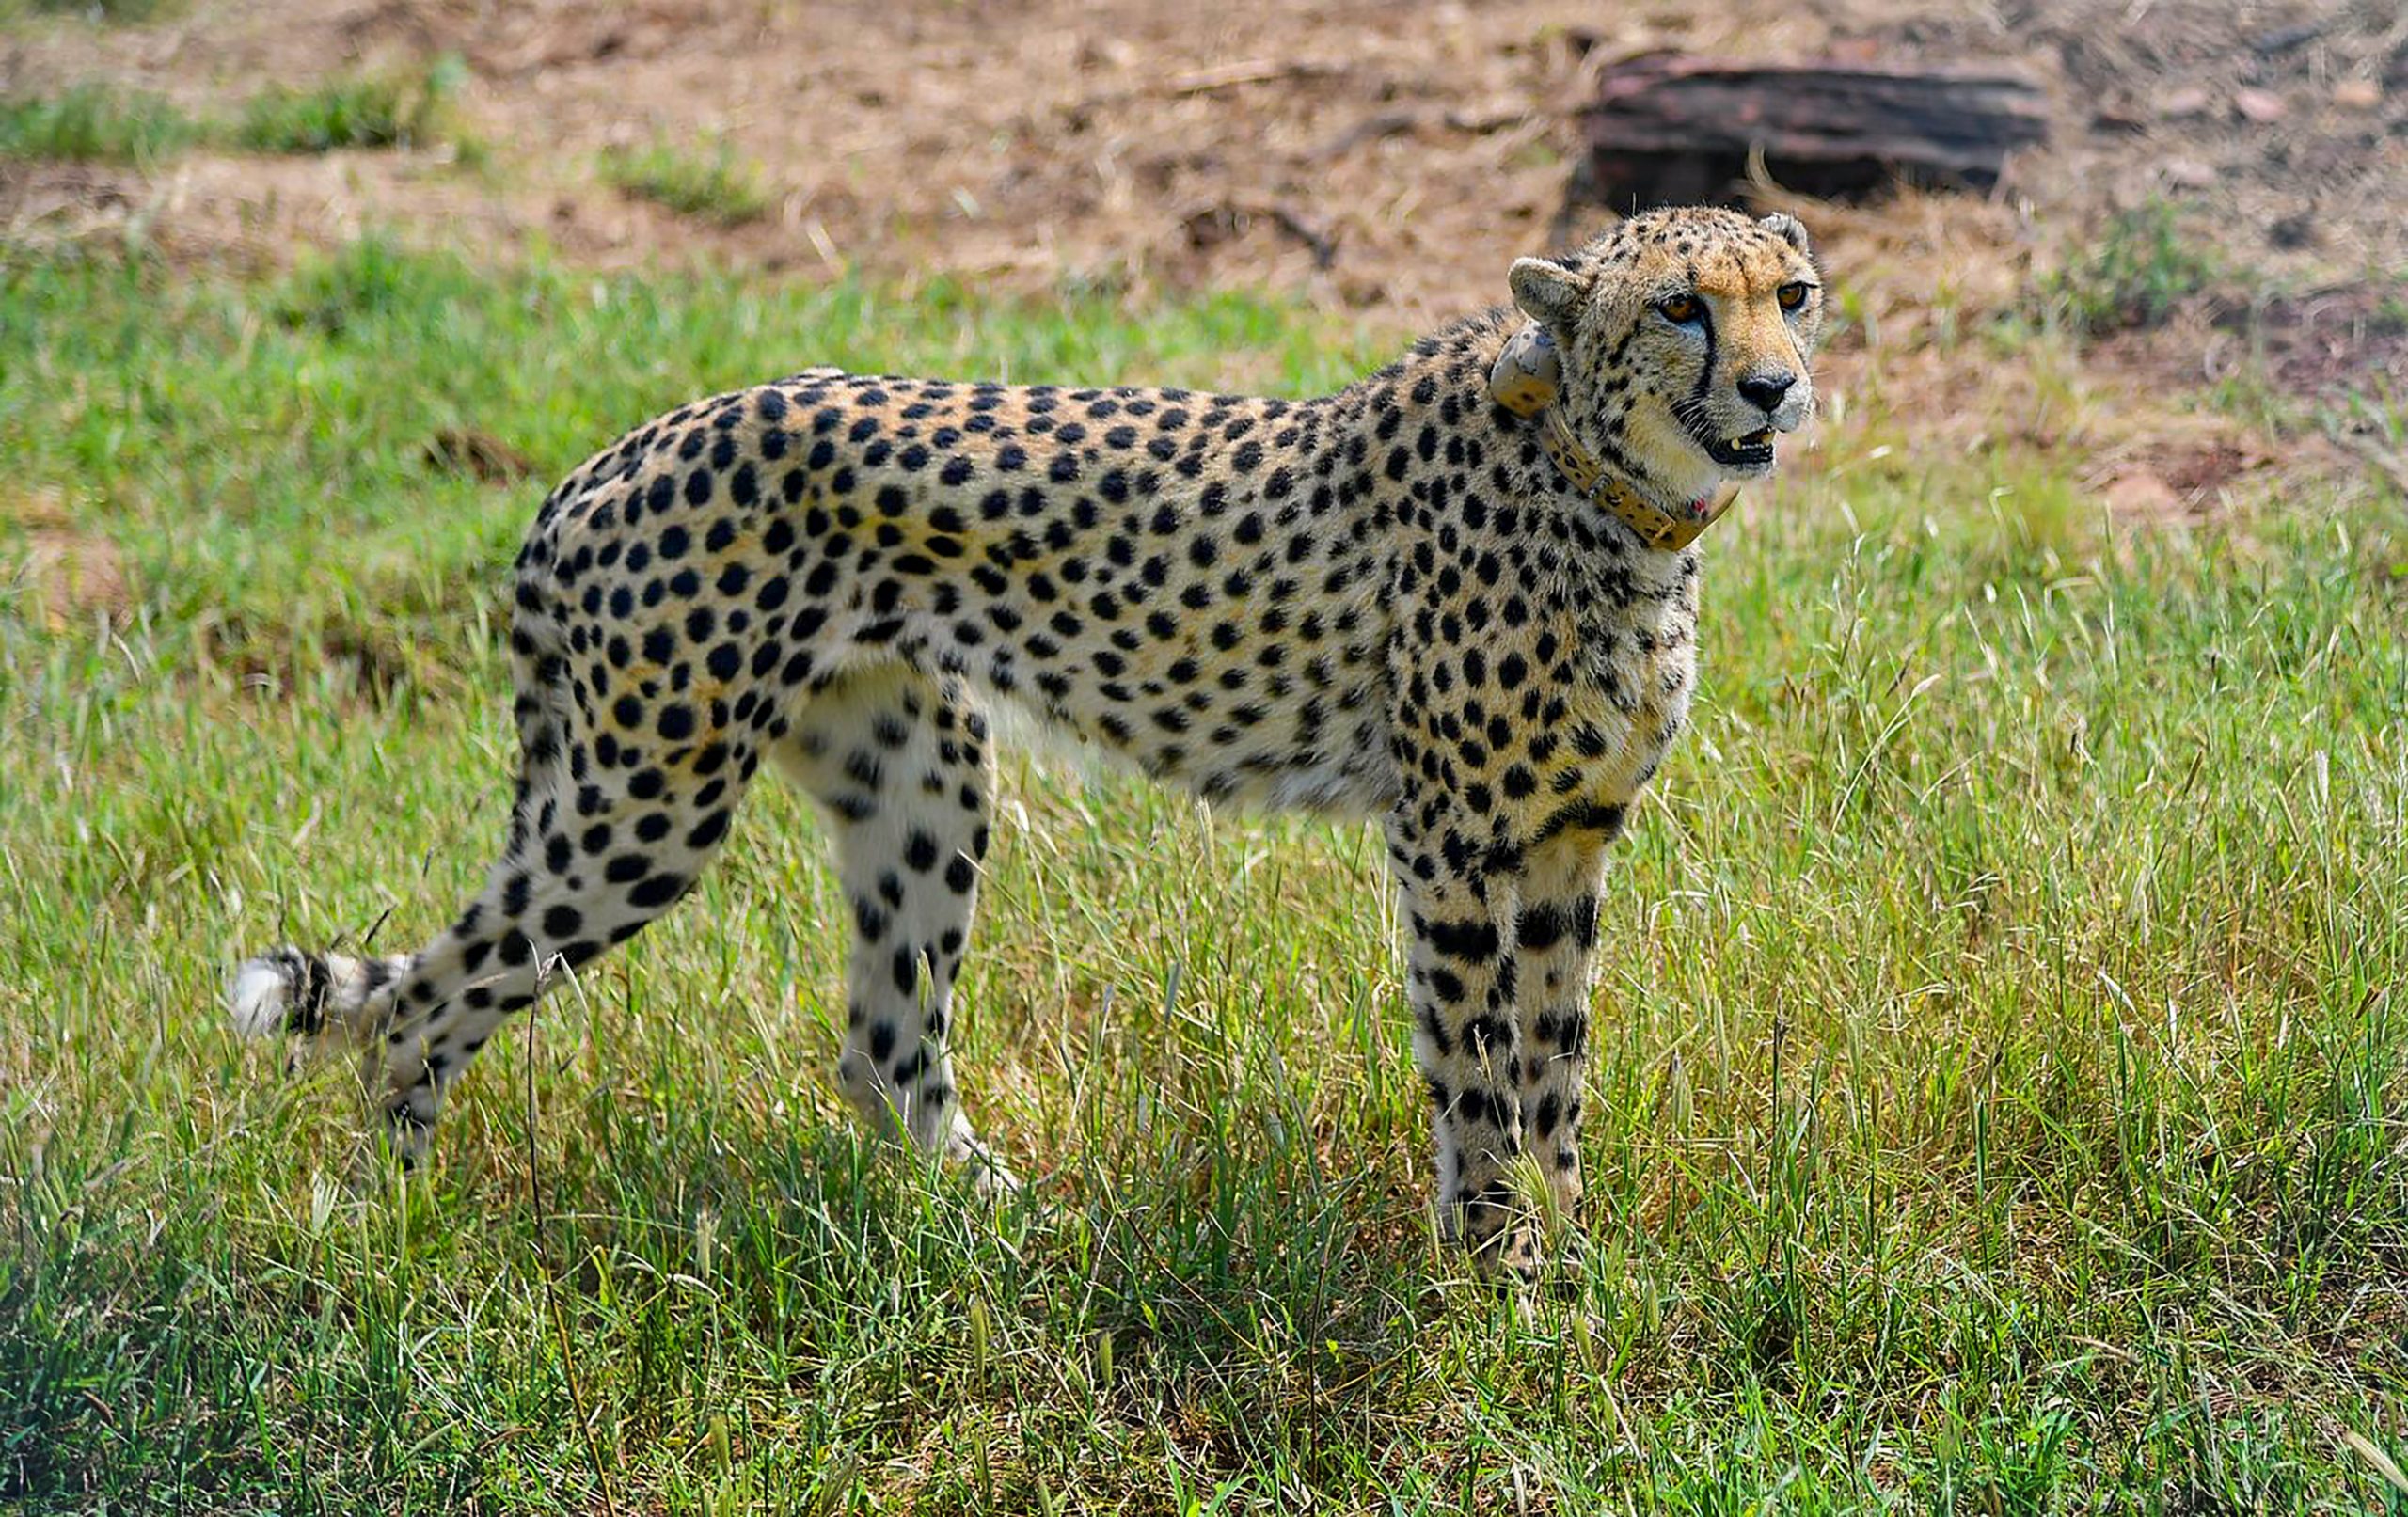 Cheetahs at Kuno National Park: Villagers fear land acquisition, human-animal conflict